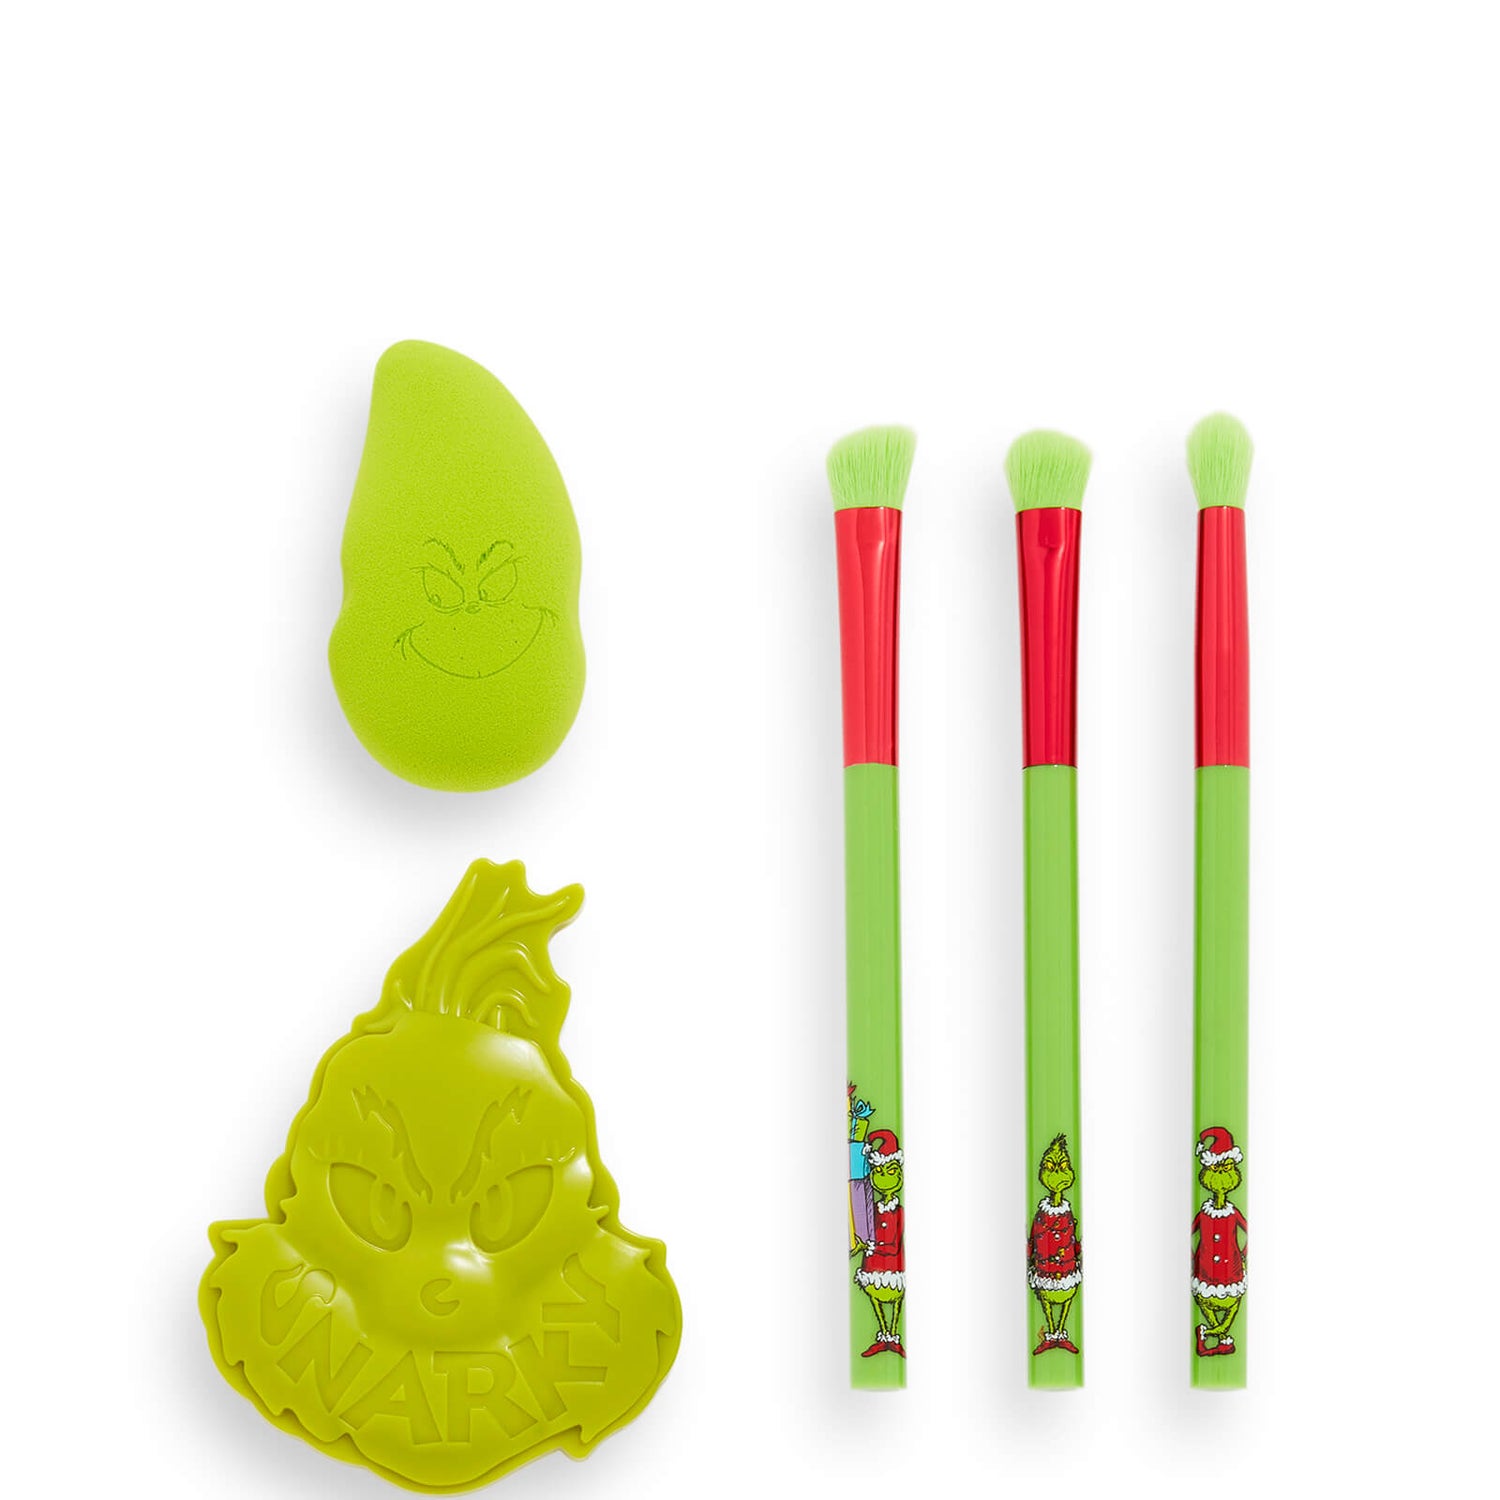 Makeup Revolution The Grinch x Revolution The Grinch Who Stole Christmas Gift Set (Worth £23.00)